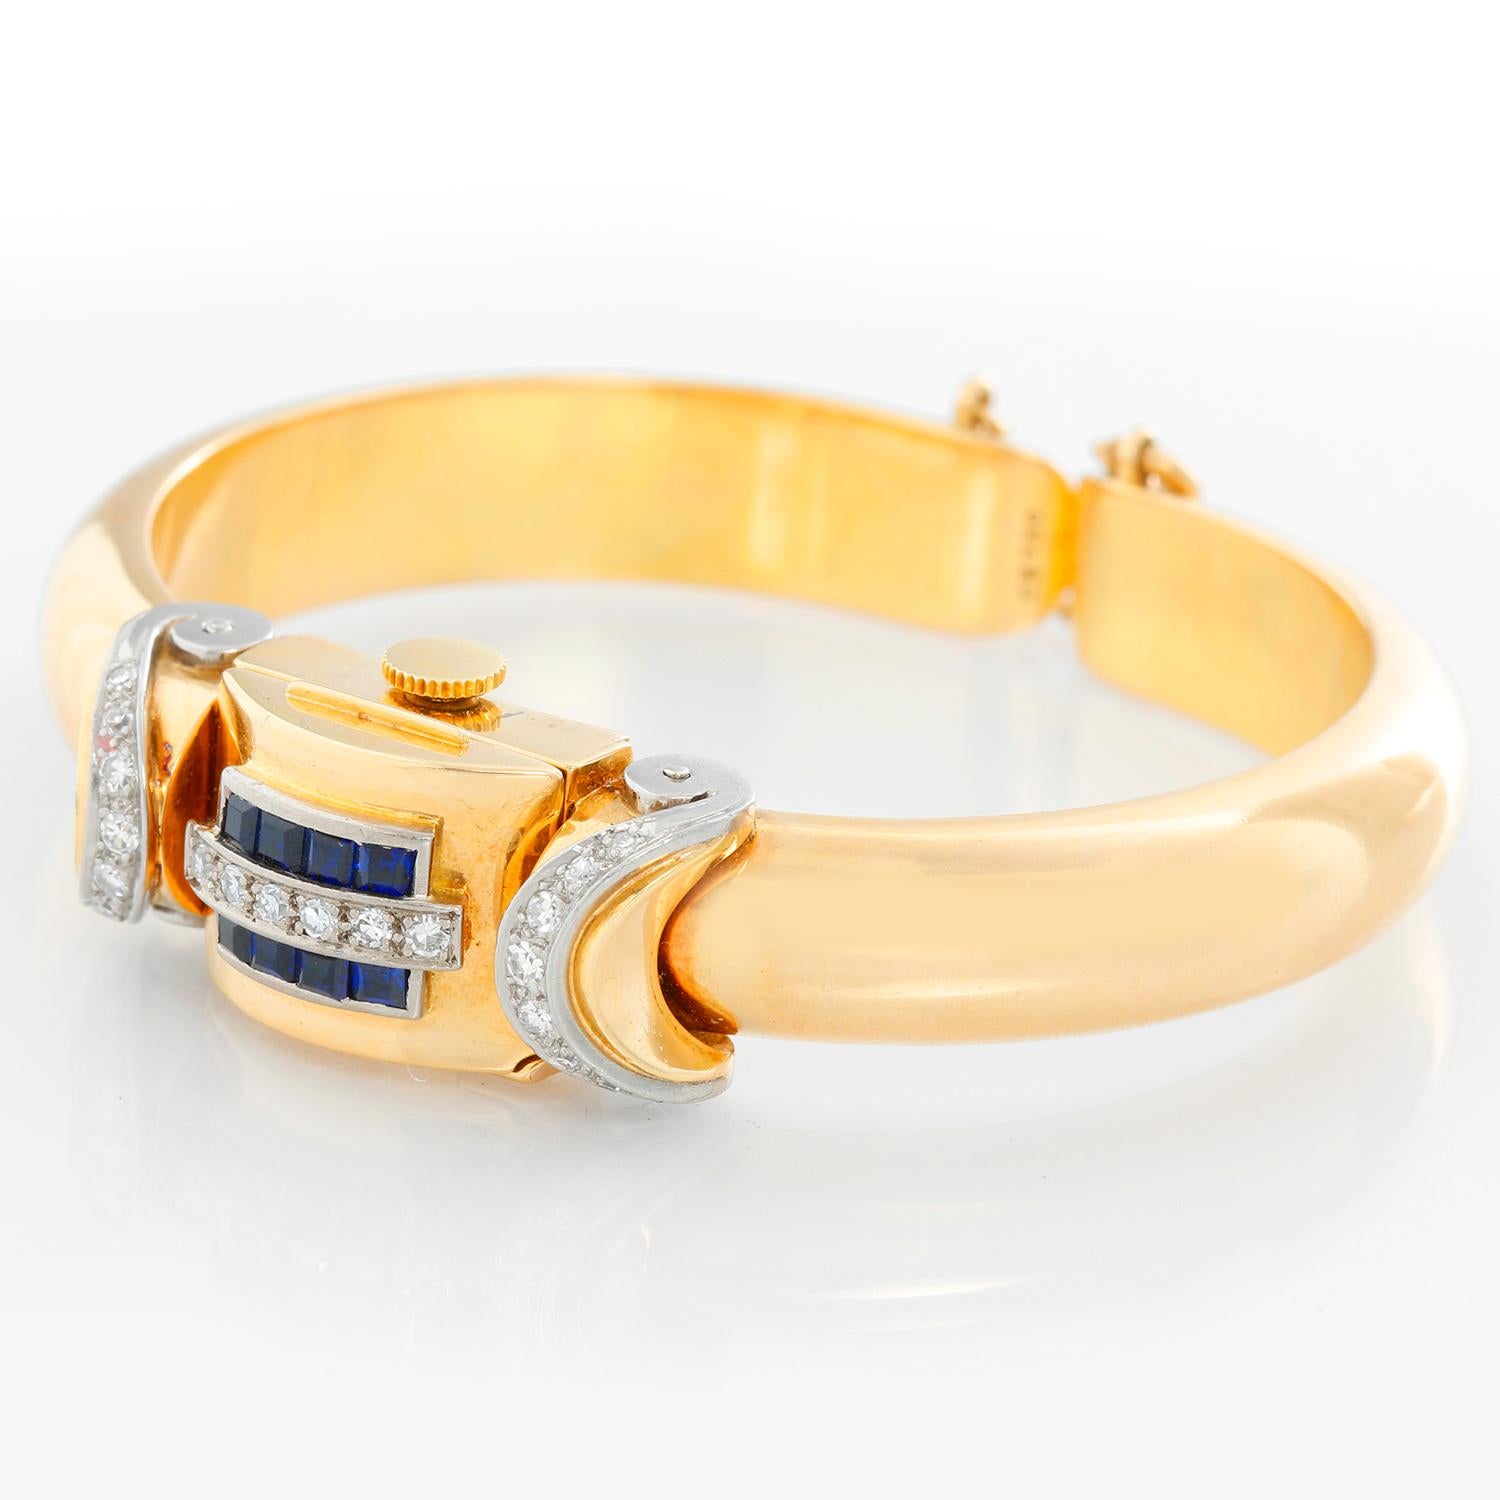 Vintage Rolex 18K Yellow Gold Ladies Watch - Manual winding. 18K Yellow gold case (13 x 28 mm ) with diamonds and sapphires. Silvered dial with yellow gold hour markers. 18K Yellow gold mango style bracelet; bracelet will fit a 6 inches . Pre-owned